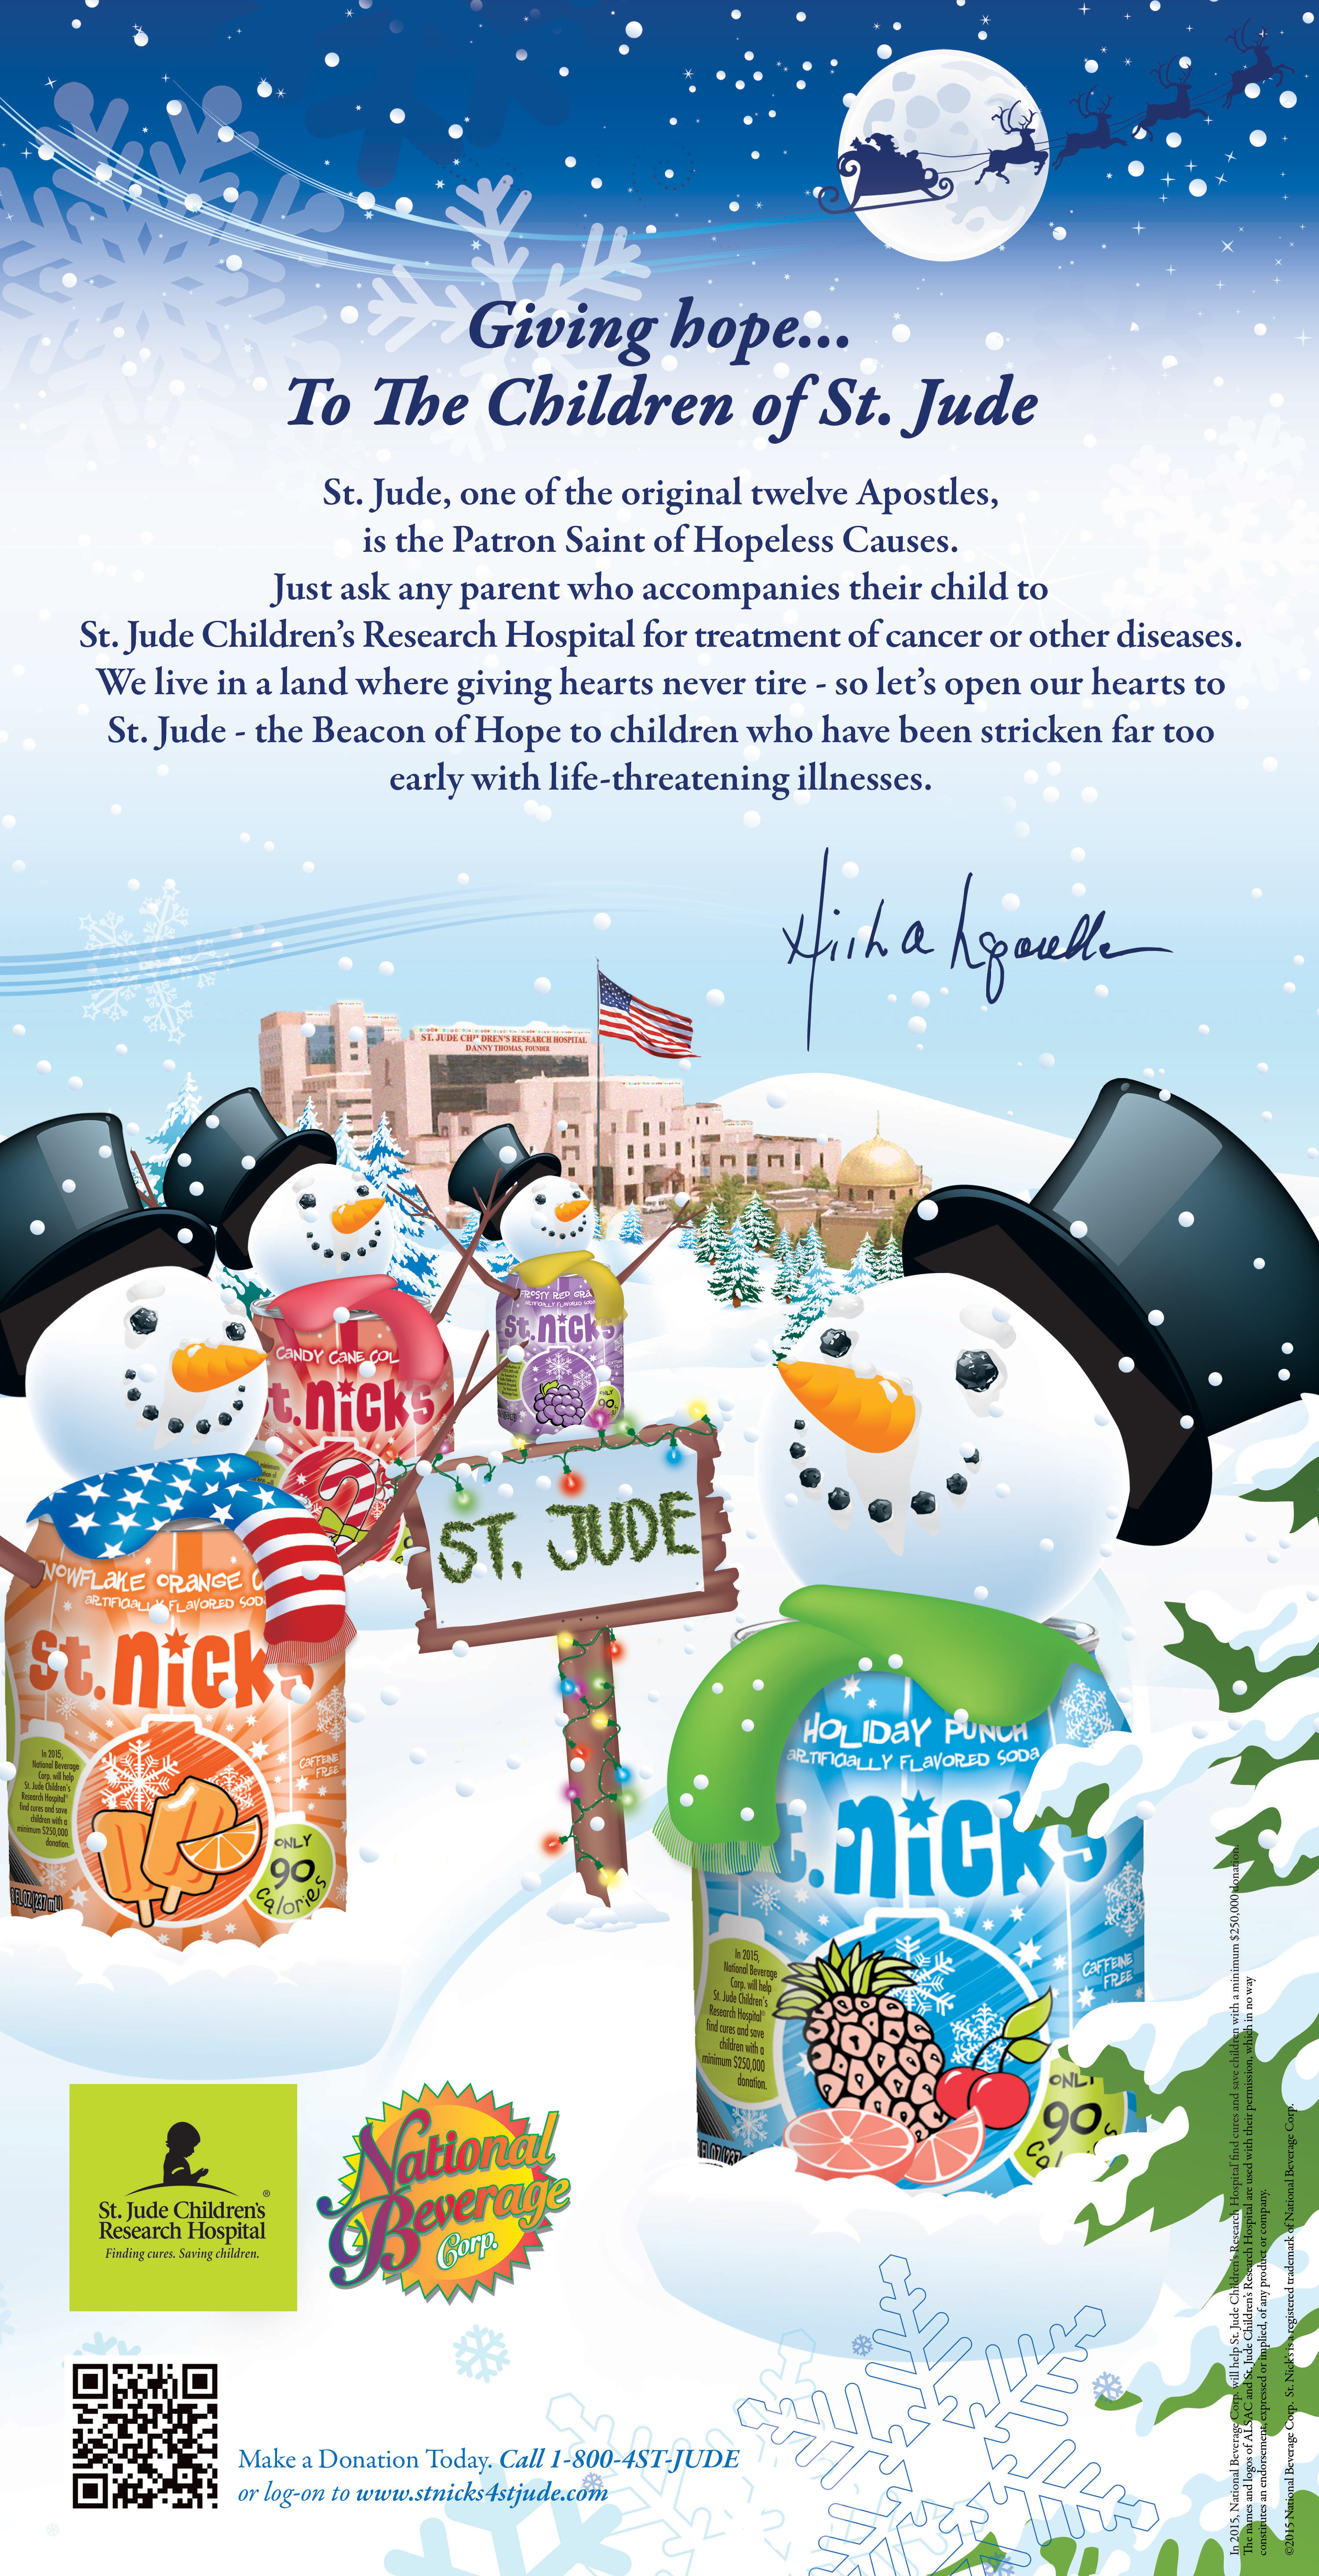 National Beverage Starts St. Nick’s Drinks’ Programme To Gather Donation For St. Jude’s Children